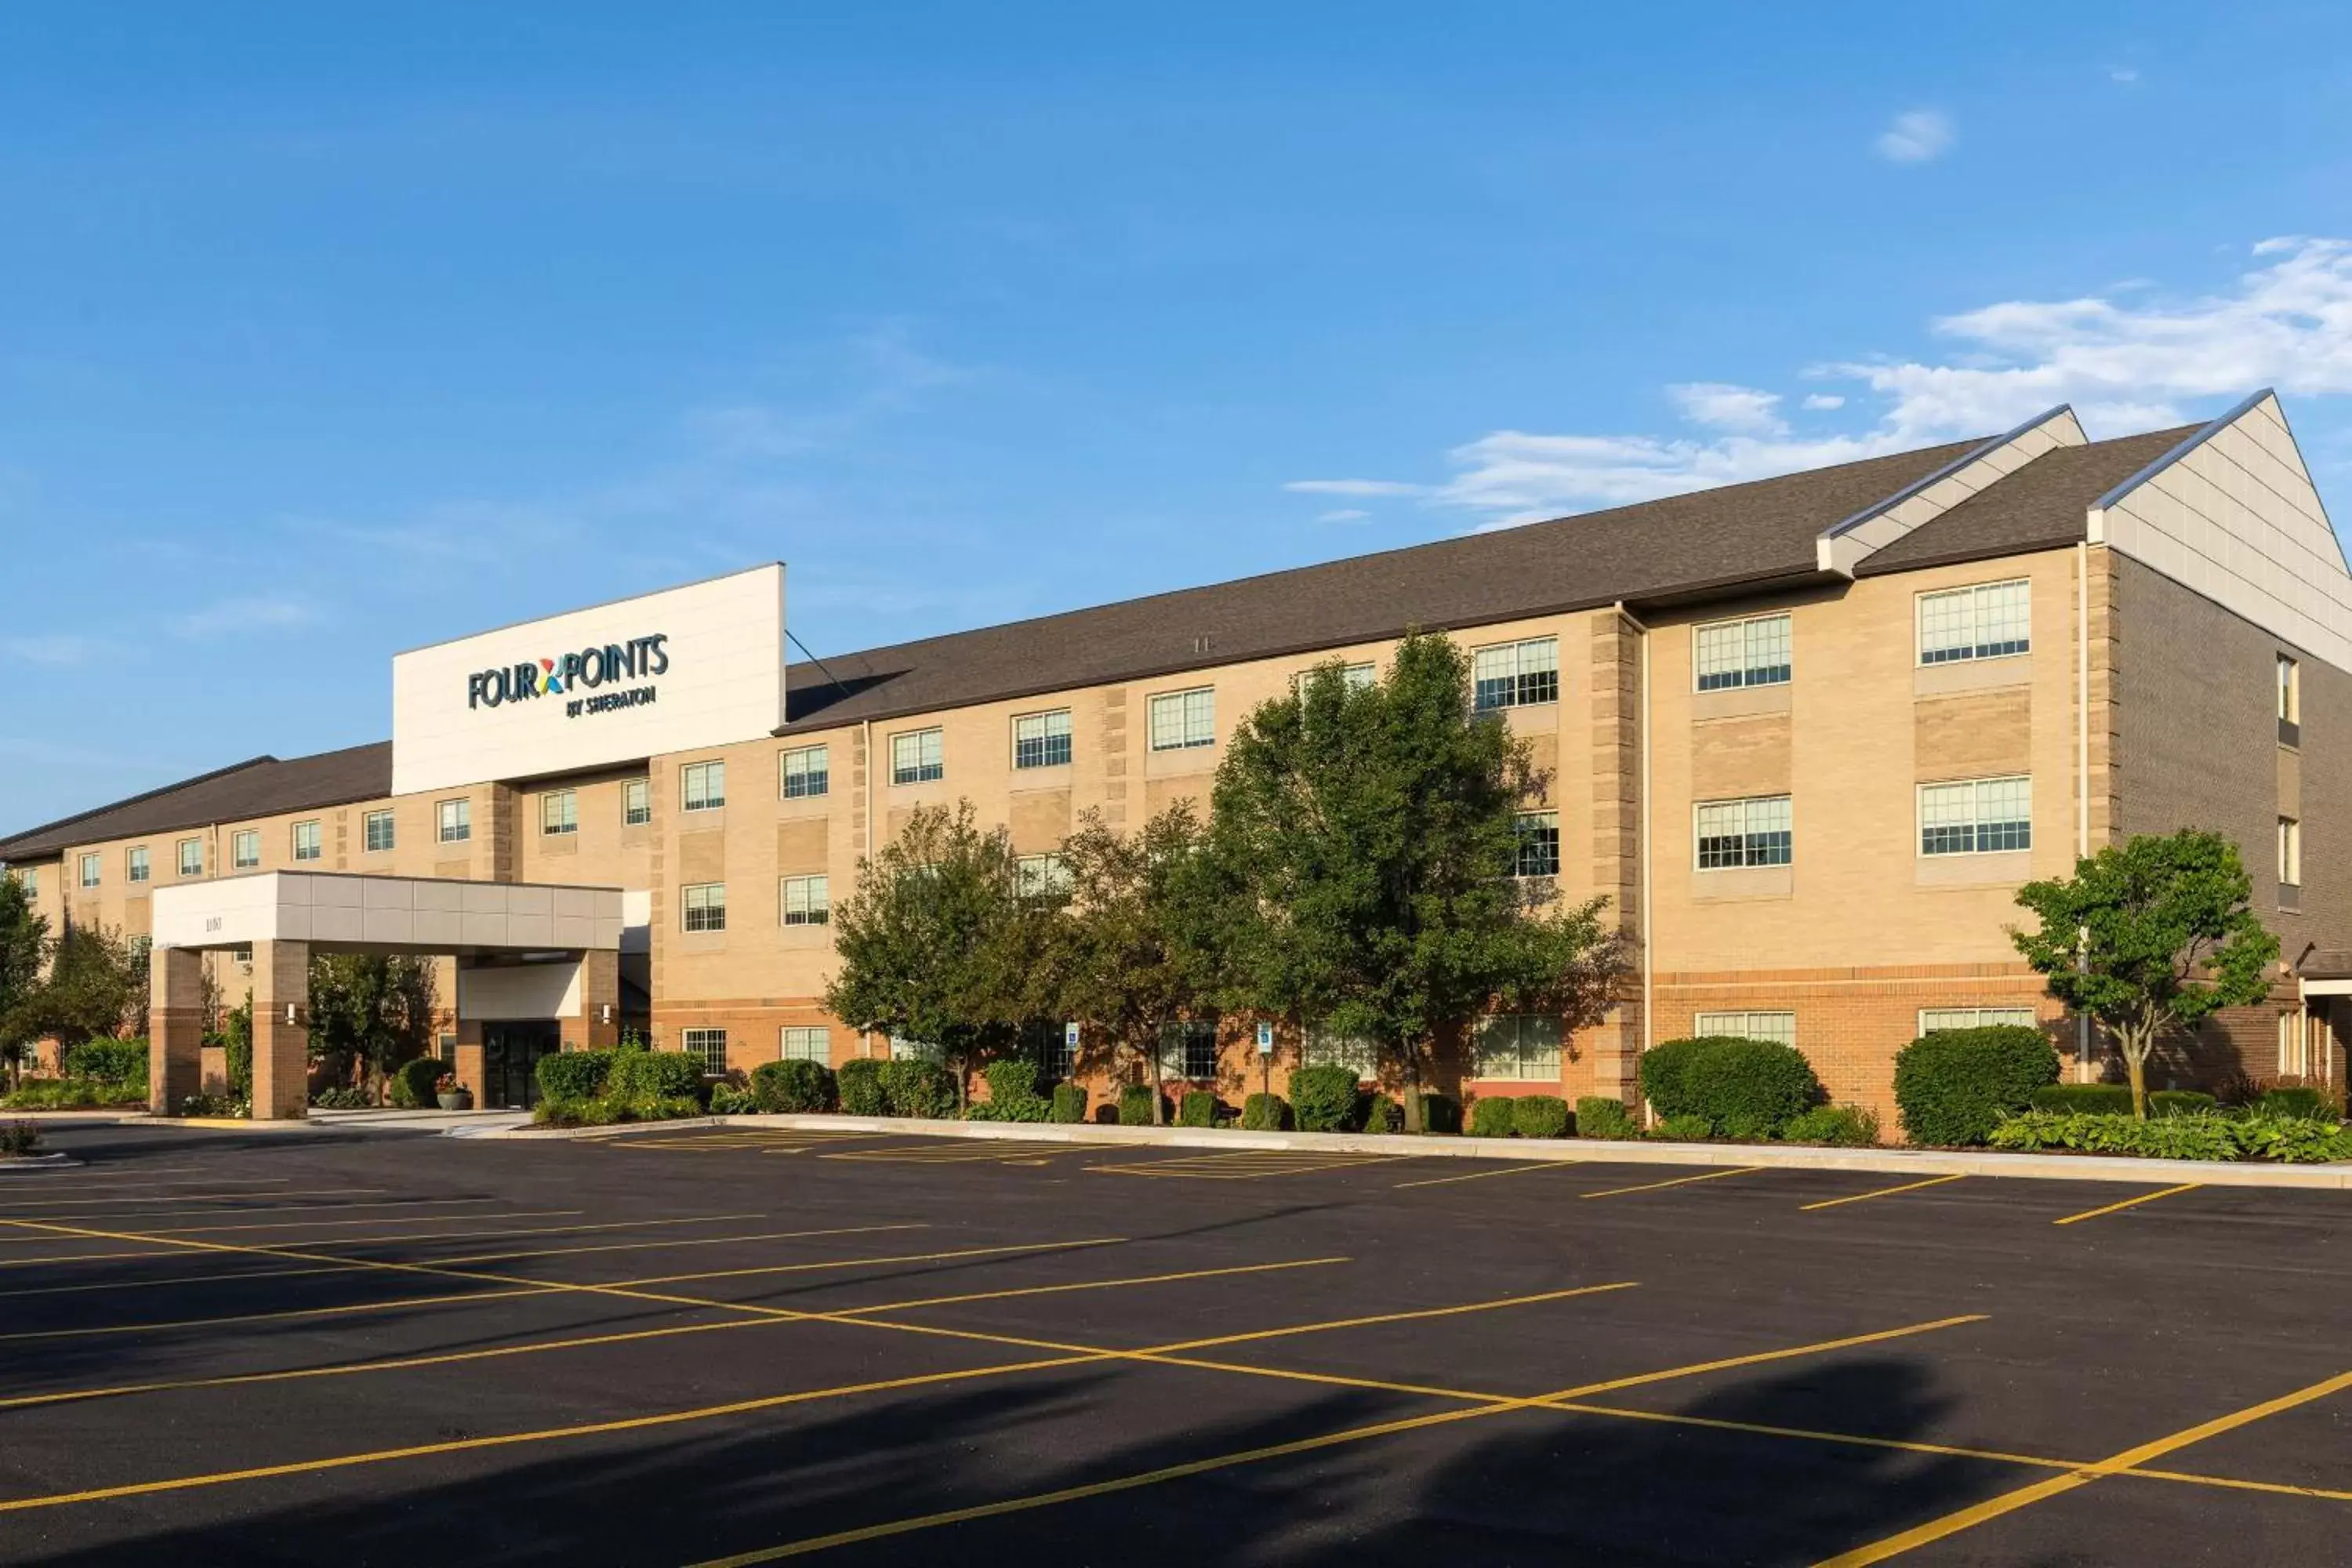 Property Building in Four Points by Sheraton Chicago Schaumburg